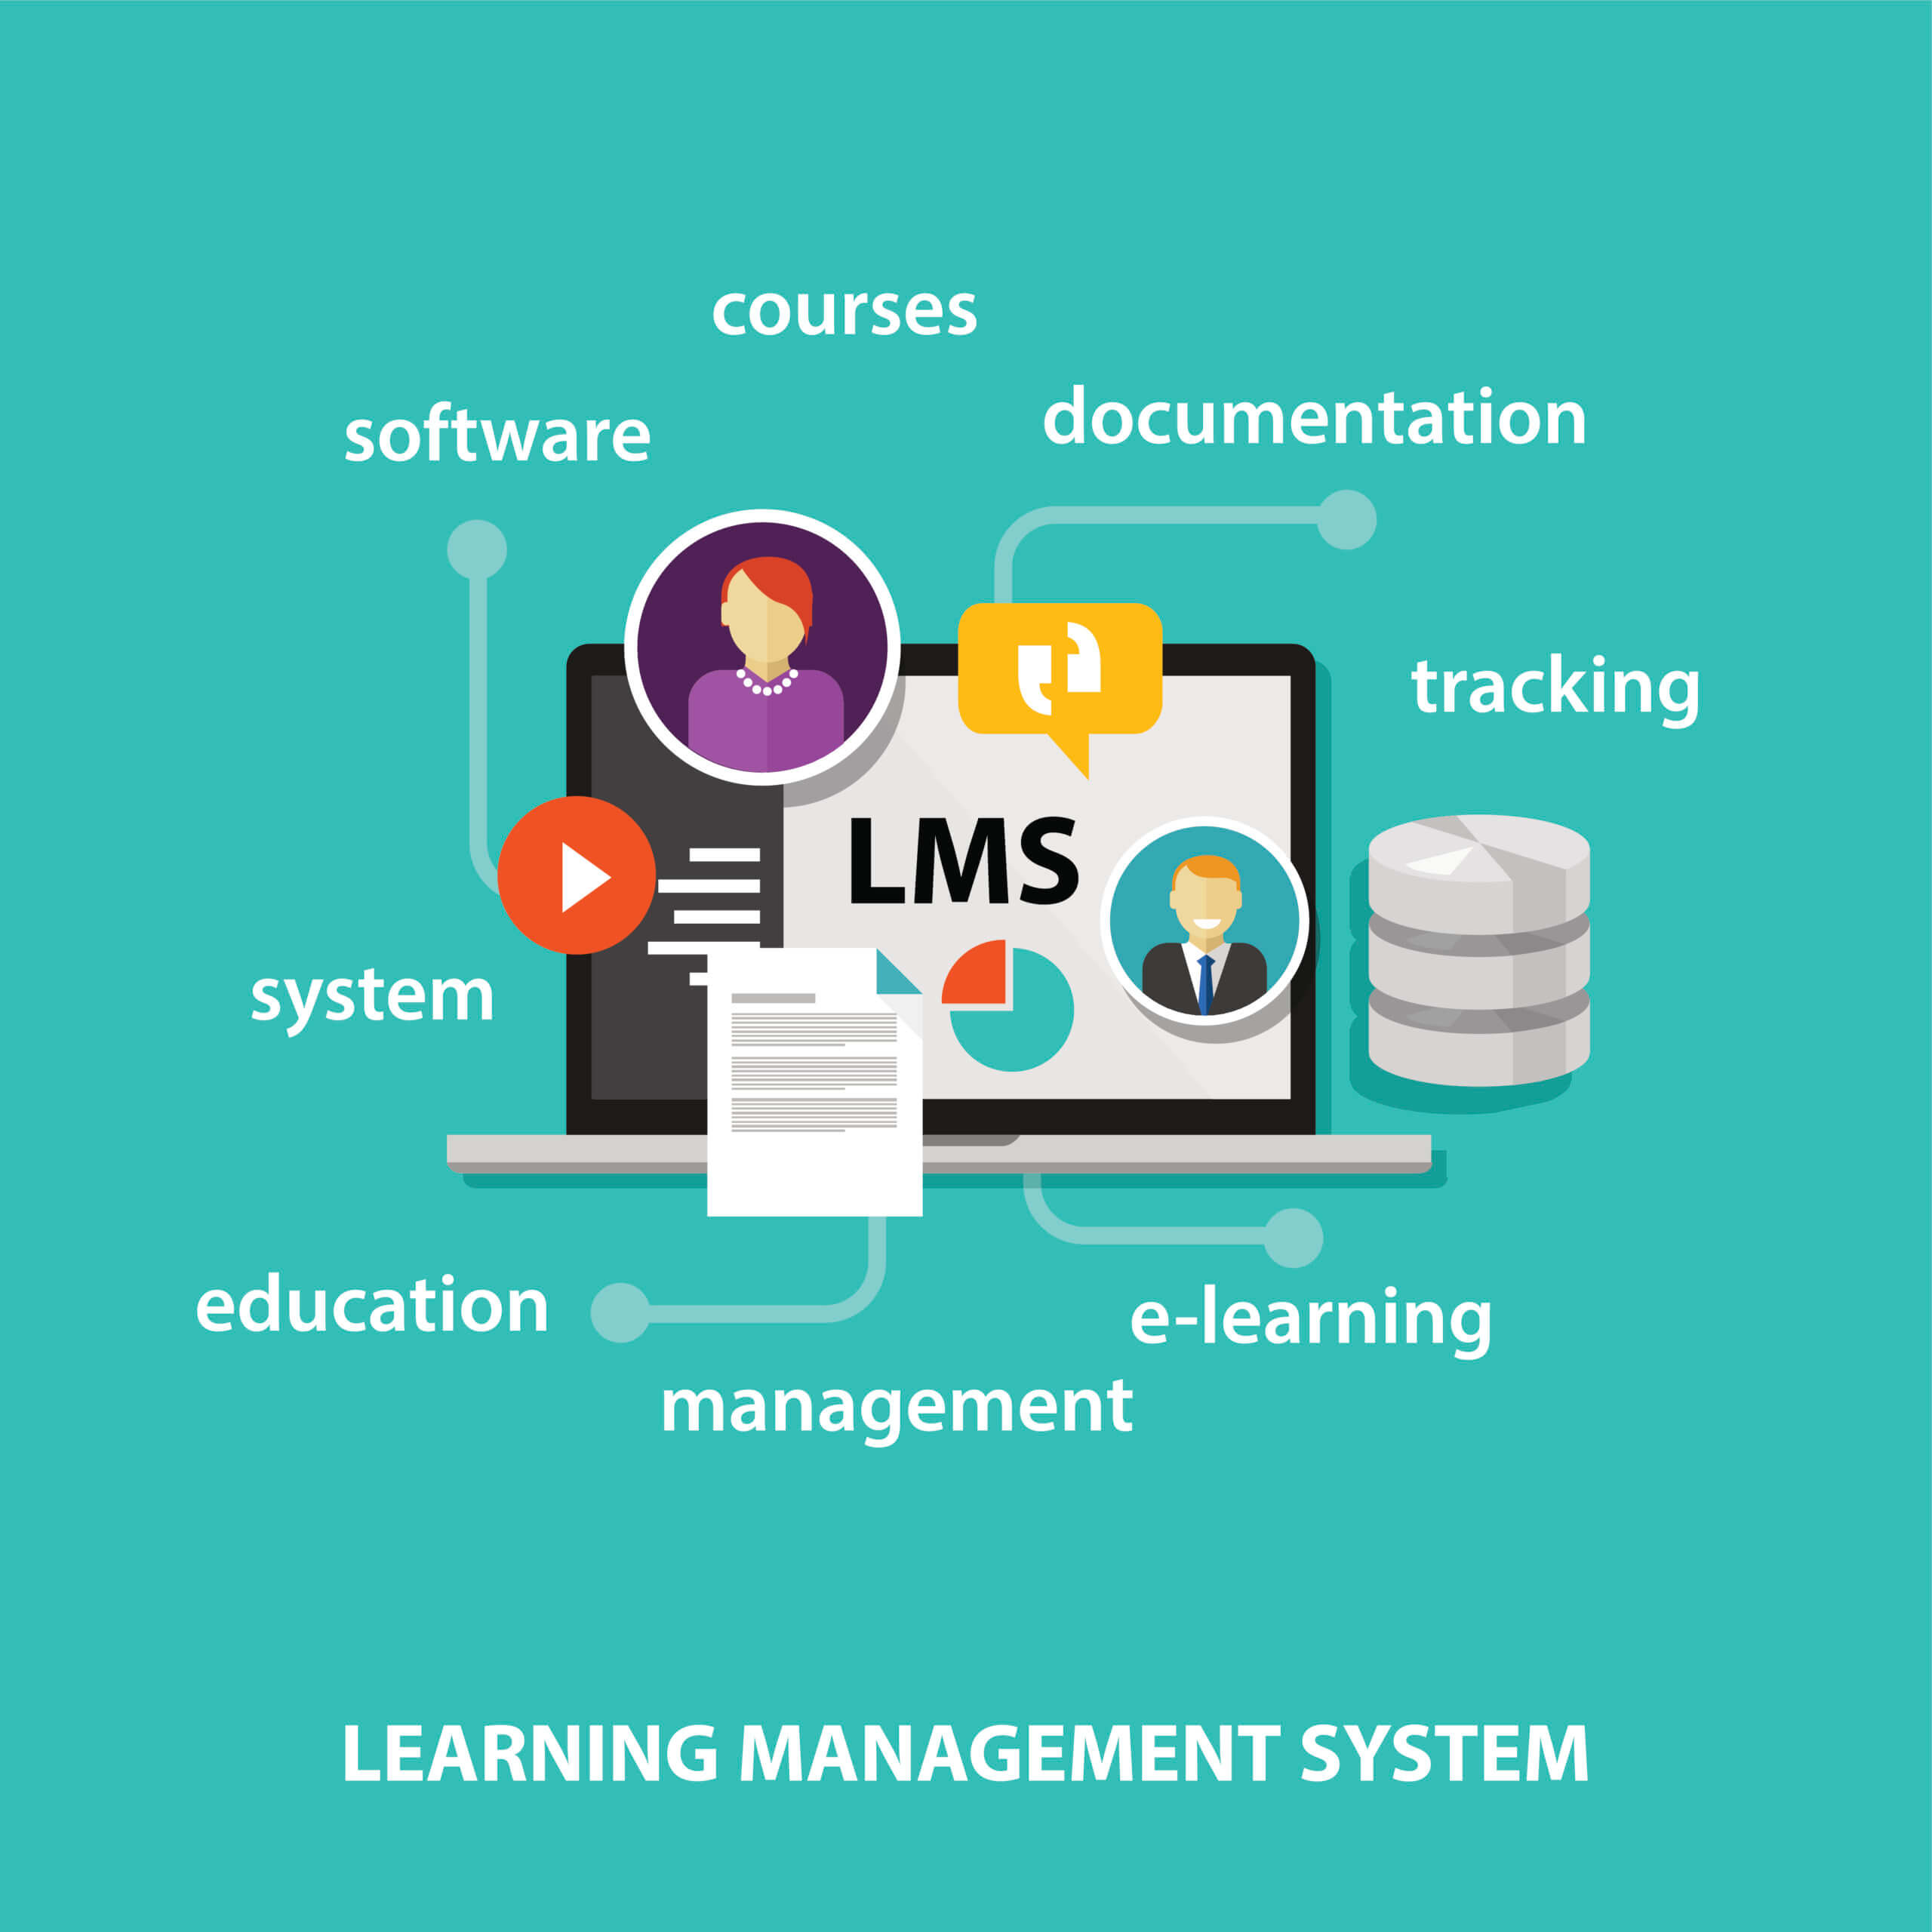 5 Leading Free or Open Source LMS Solutions